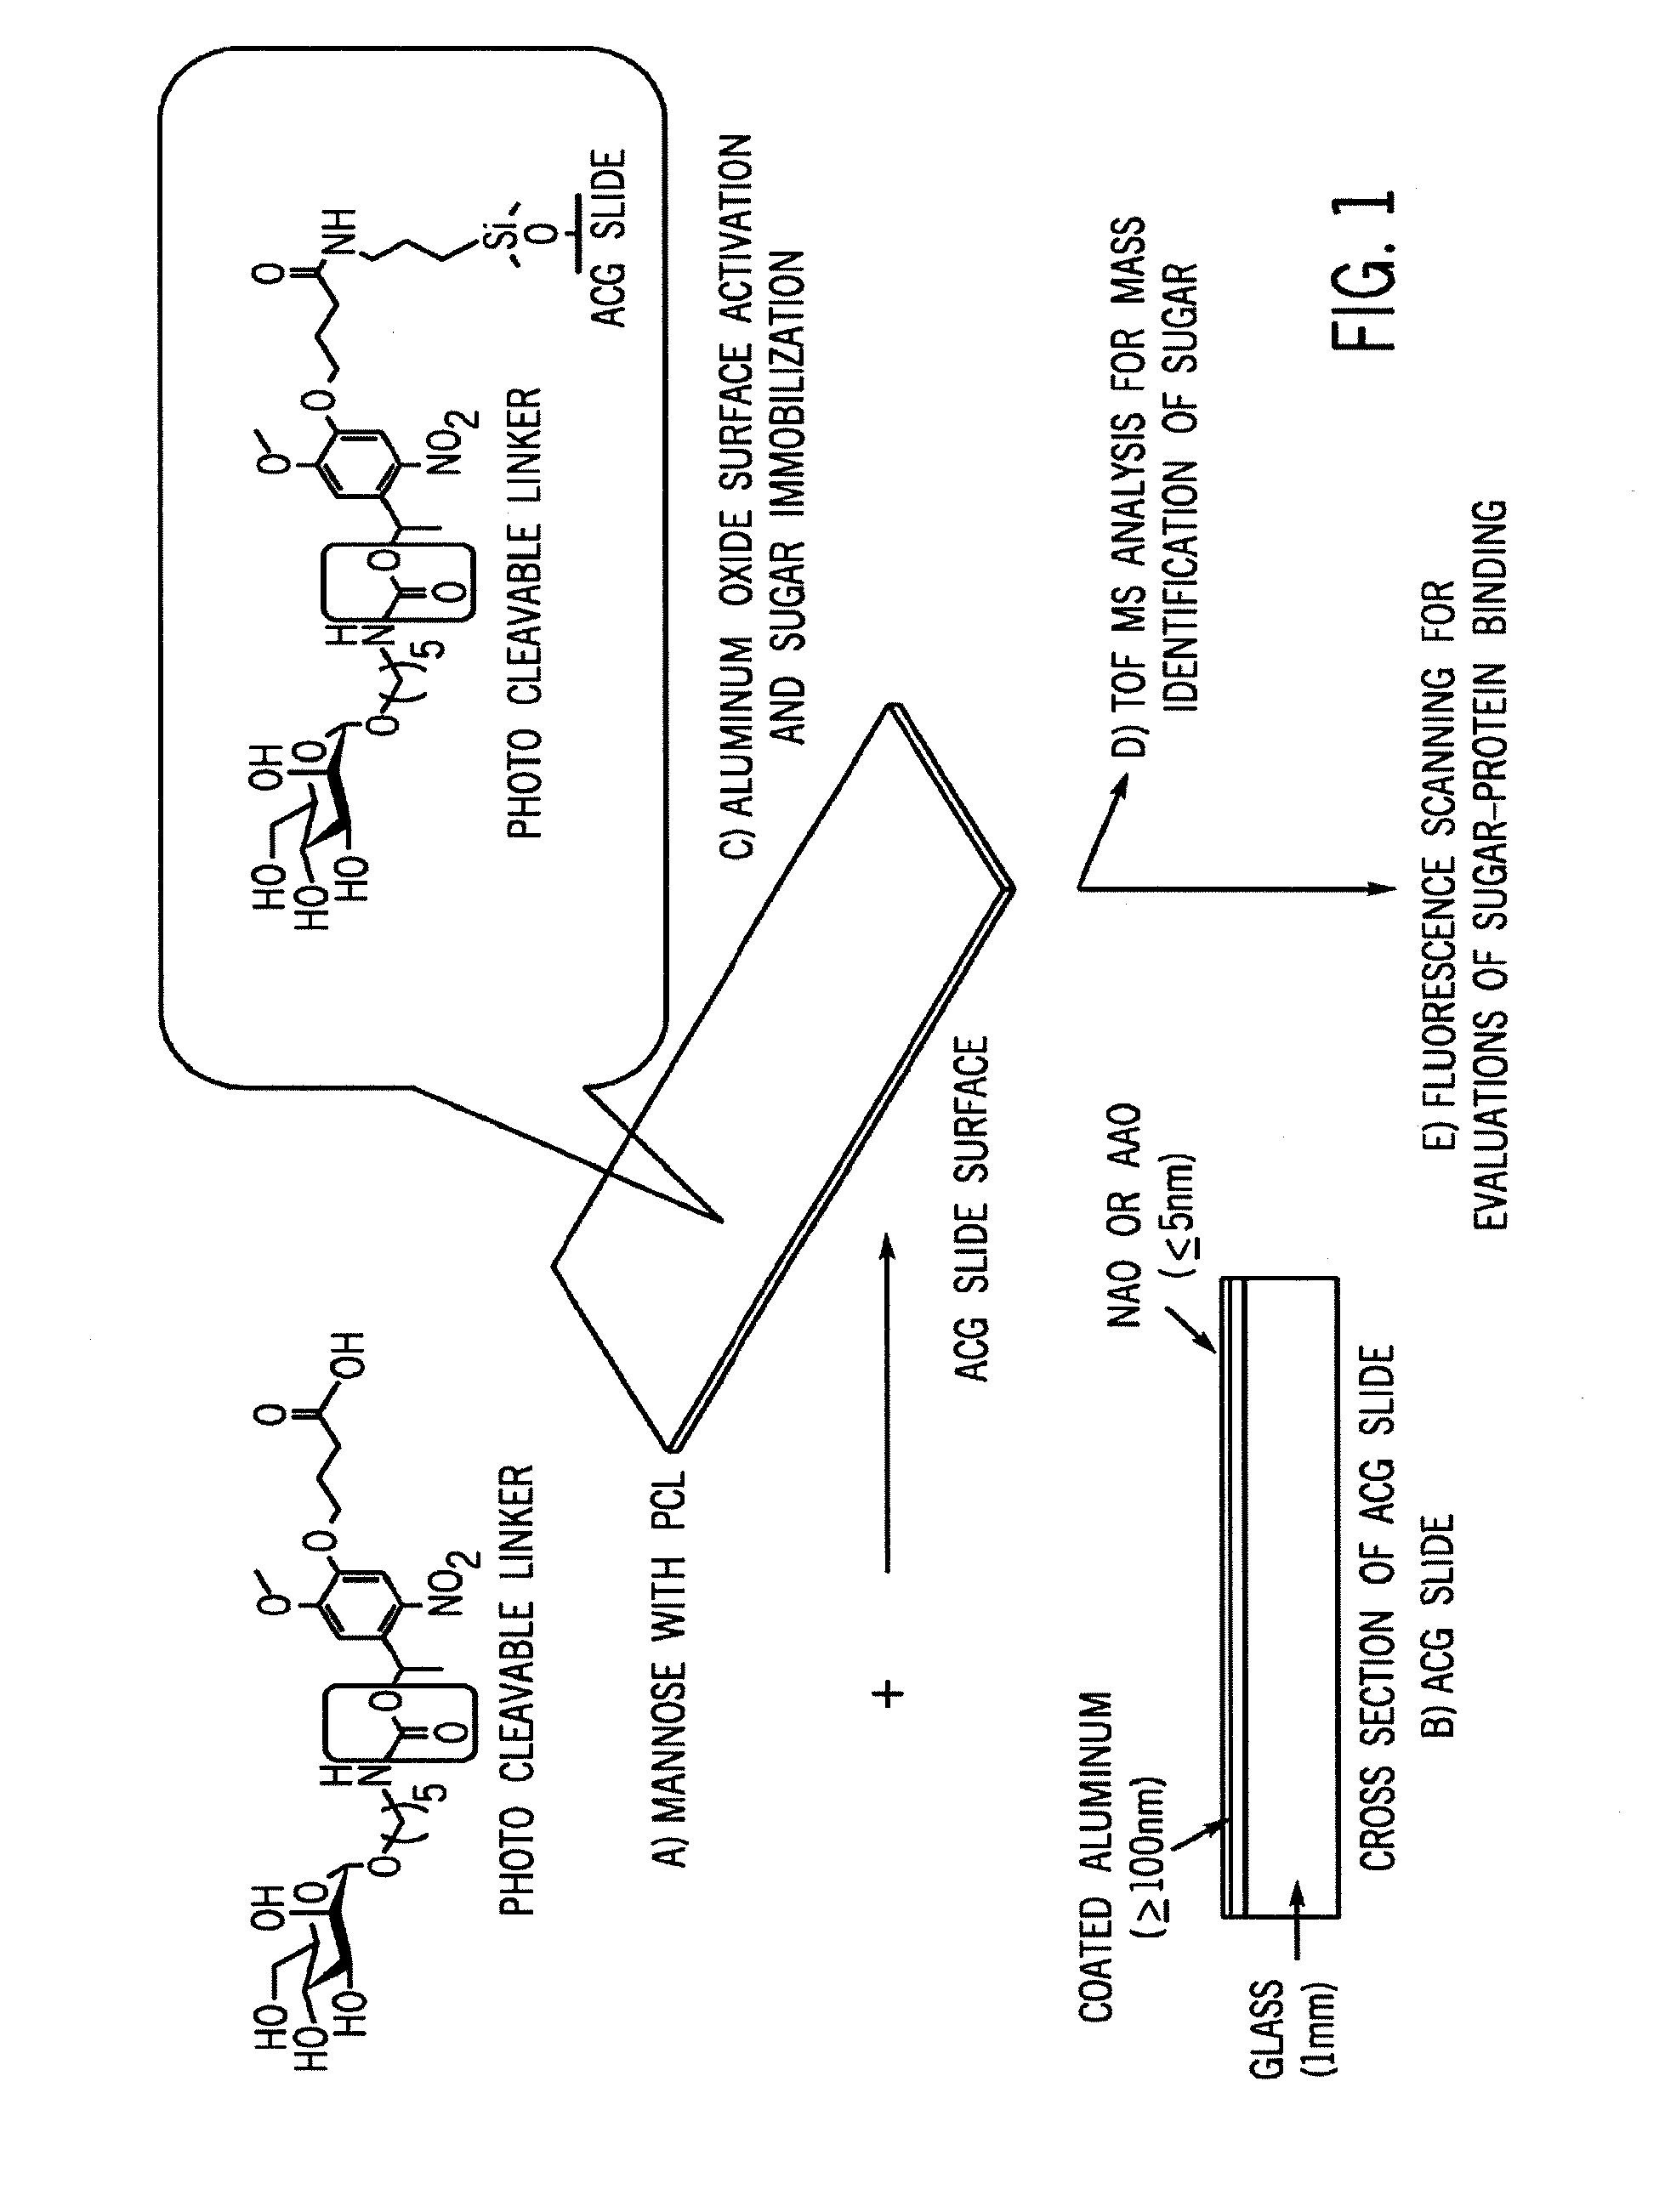 Glycan arrays on ptfe-like aluminum coated glass slides and related methods